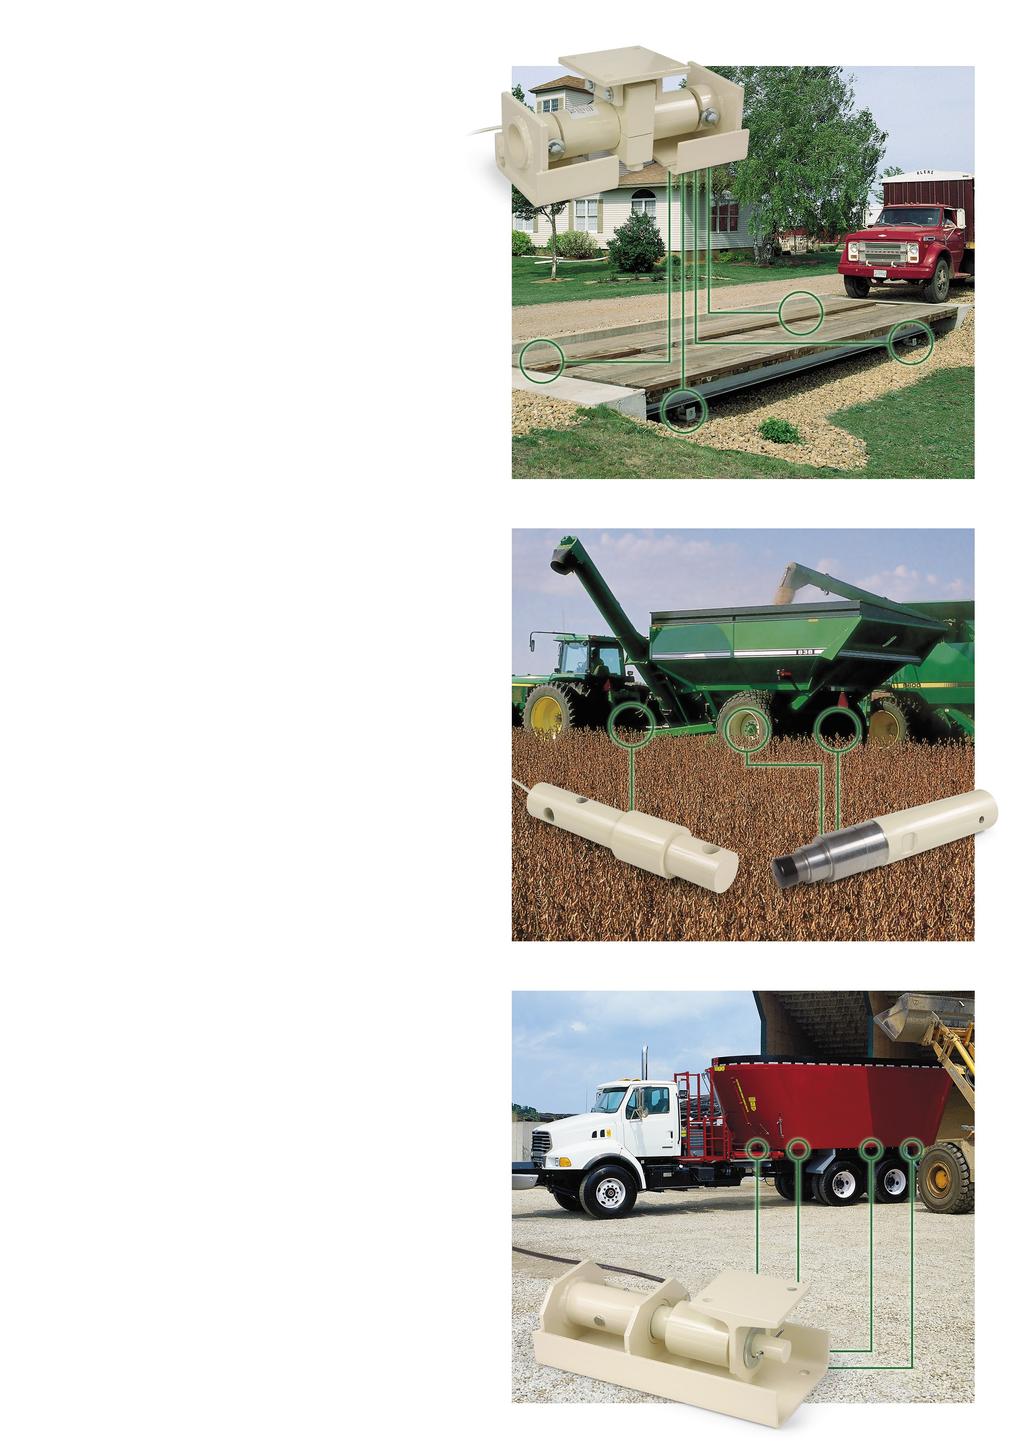 Truck Scales An on-farm truck scale will save money in several ways: Verify incoming delivery weights, pre-check weights going out to the elevator or check grain yields to compare performance of